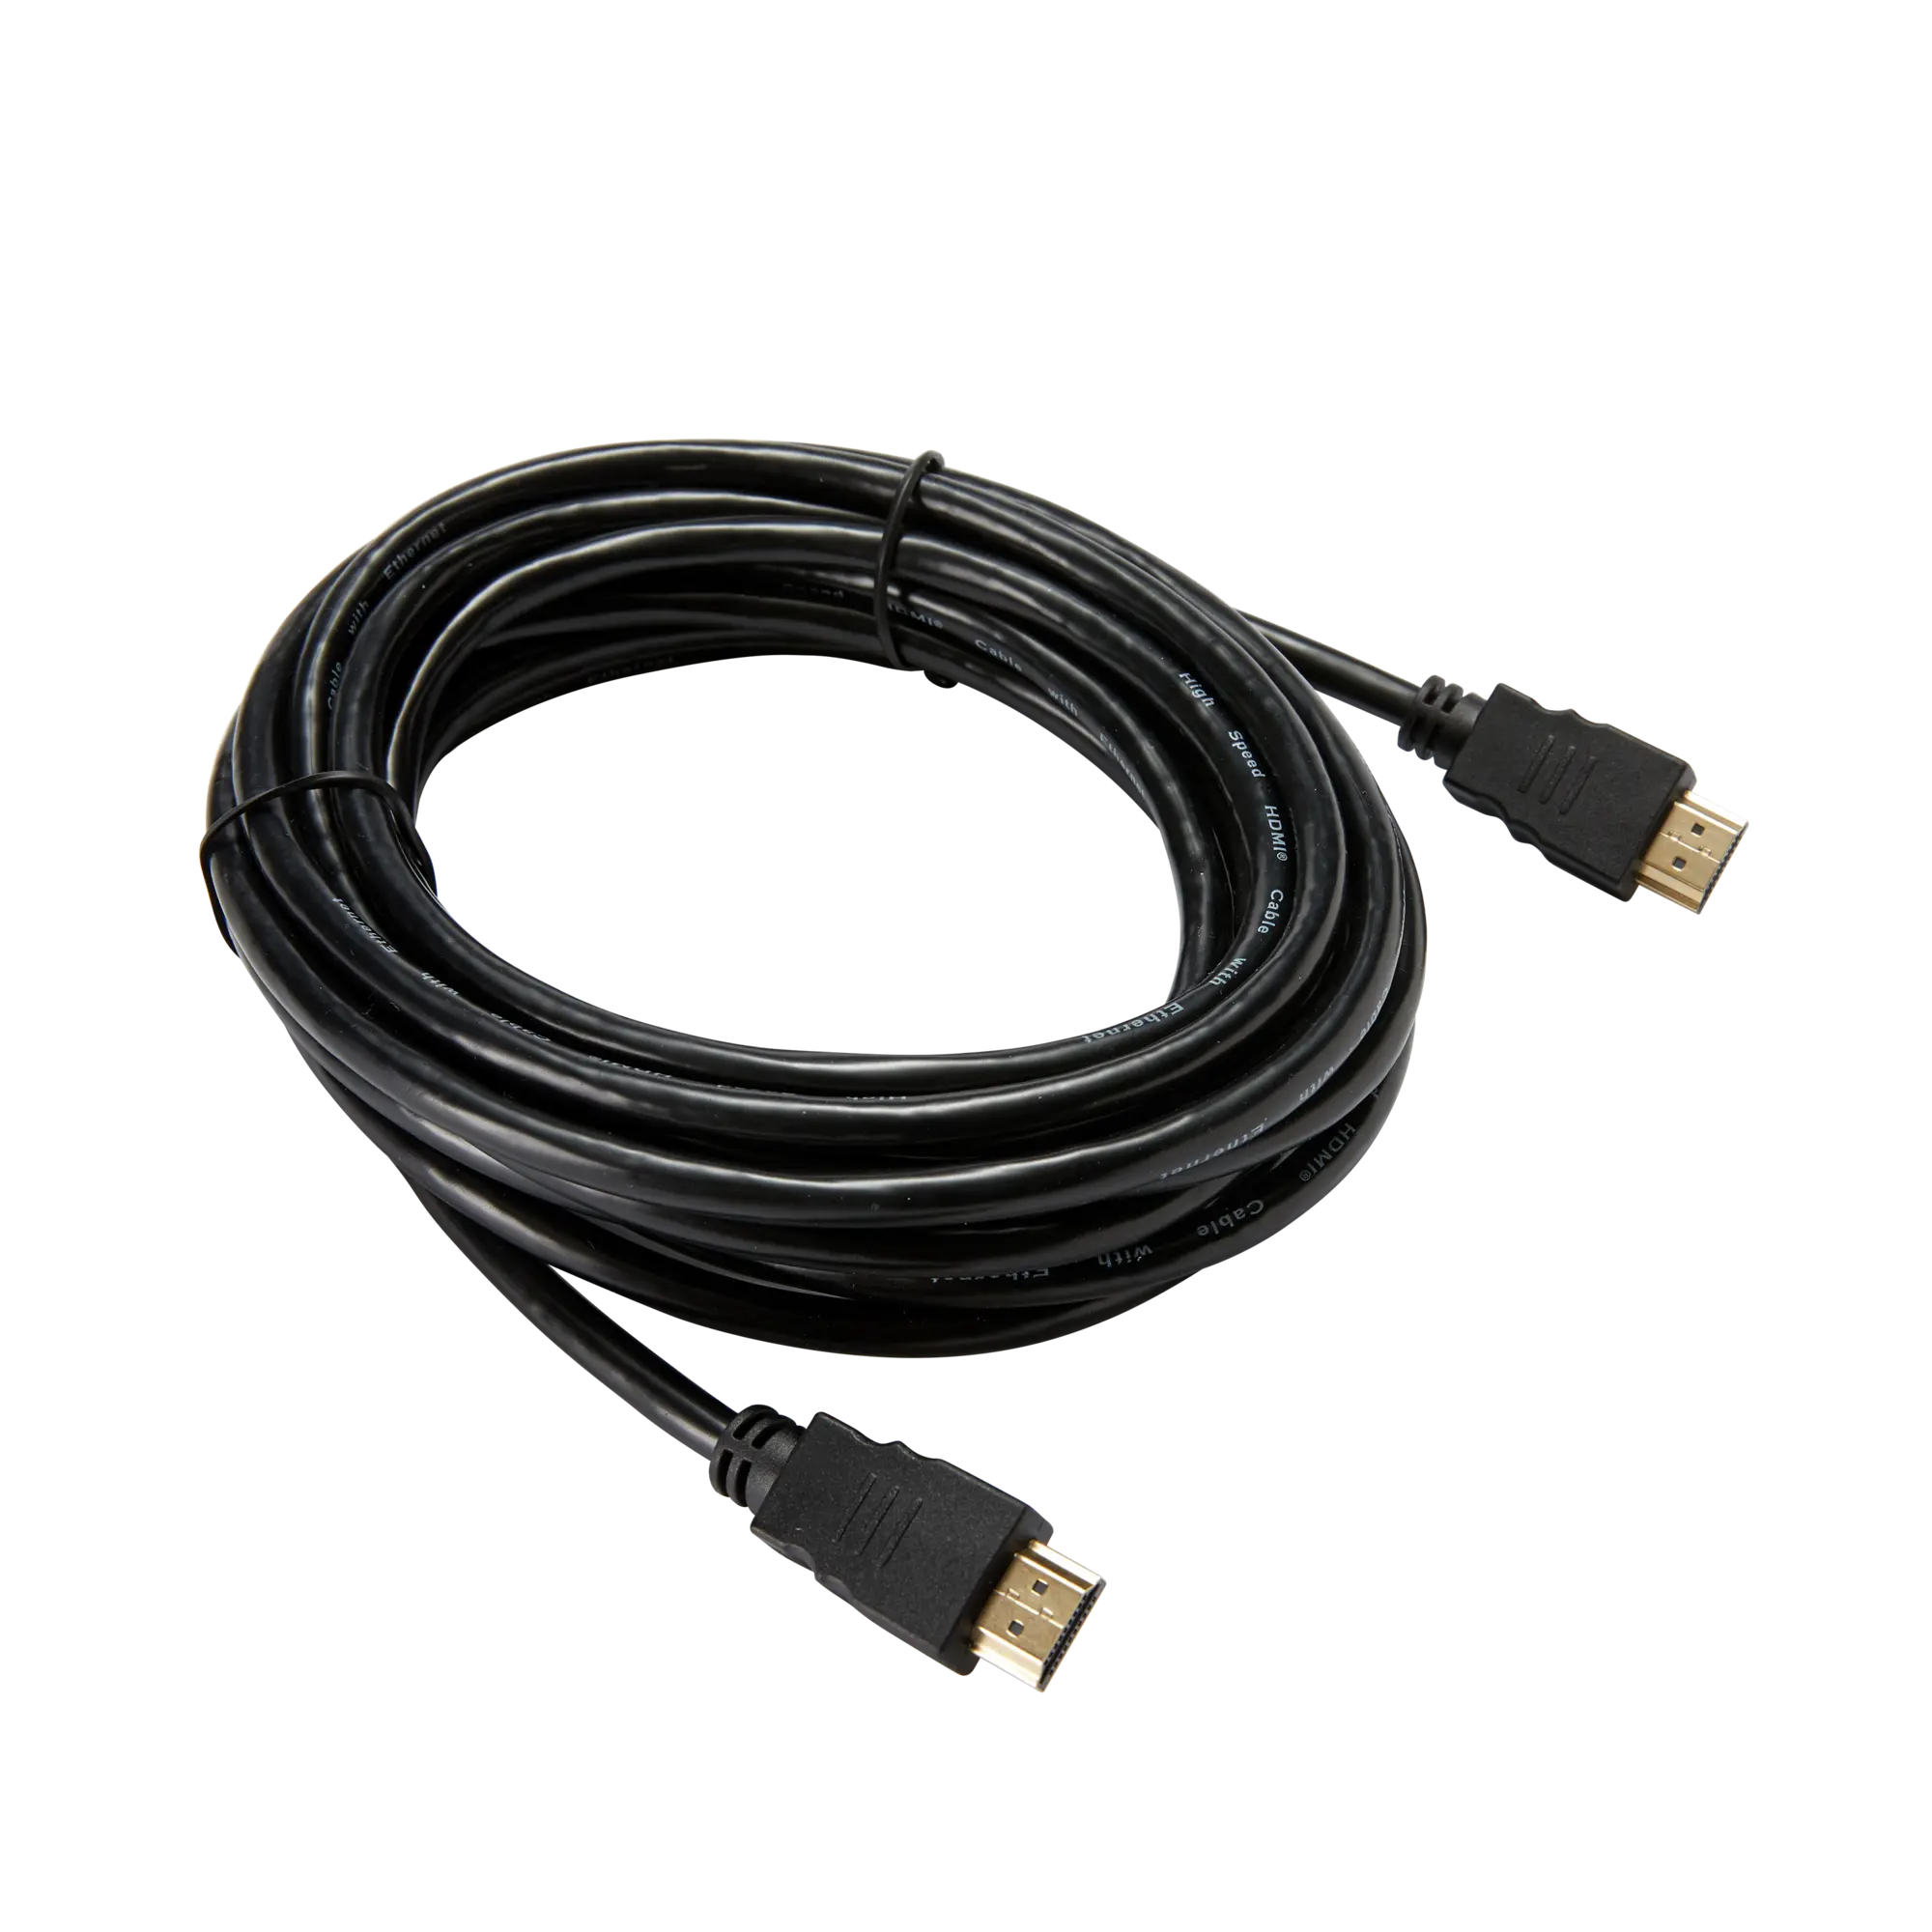 Cable HDMI Hspeed Ethernet 5 metros evology